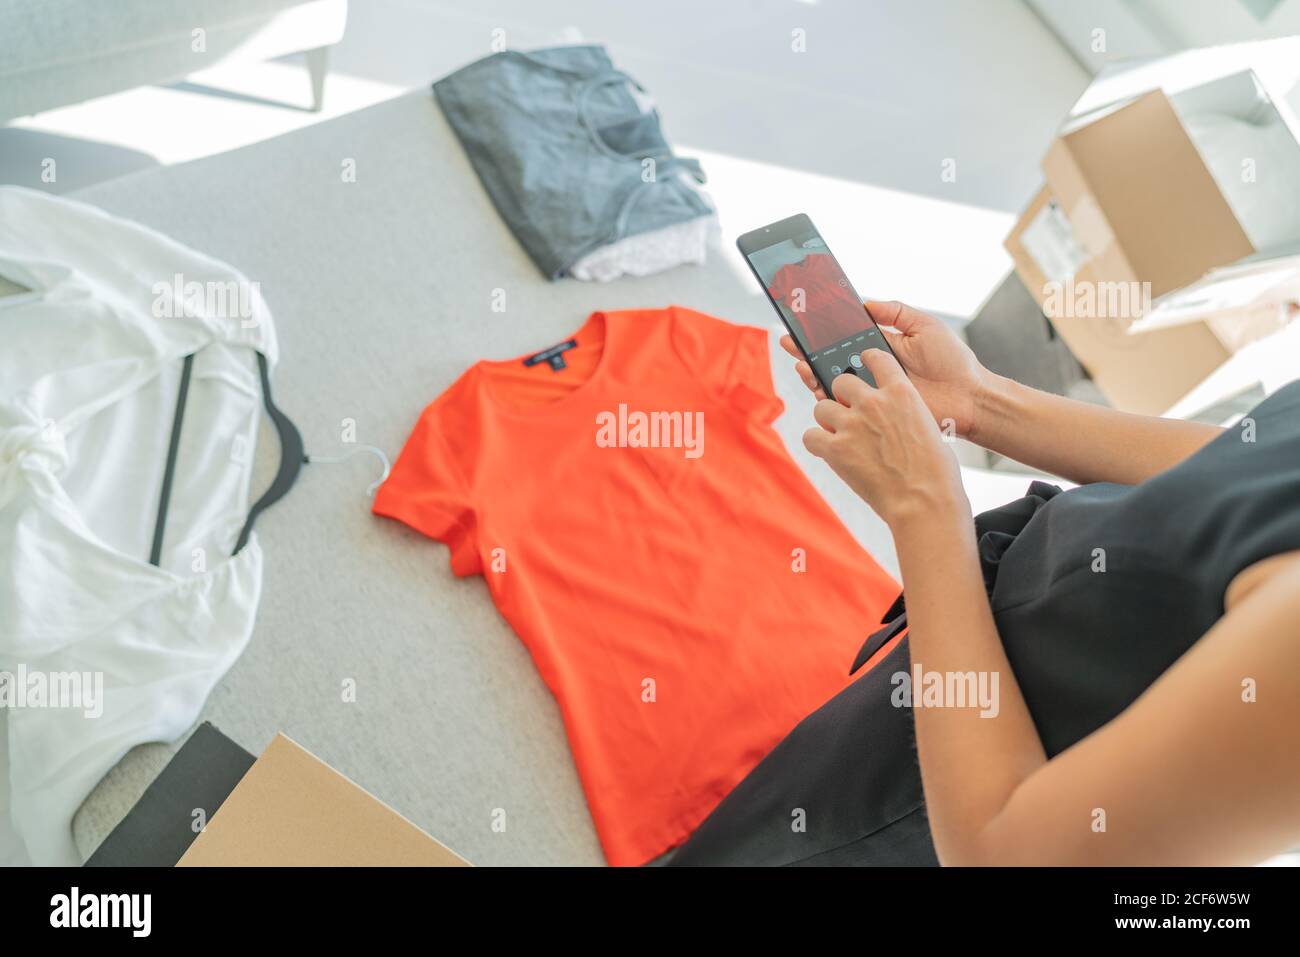 Selling online through phone app taking mobile photo of t shirt doing e-commerce small business at home Stock Photo